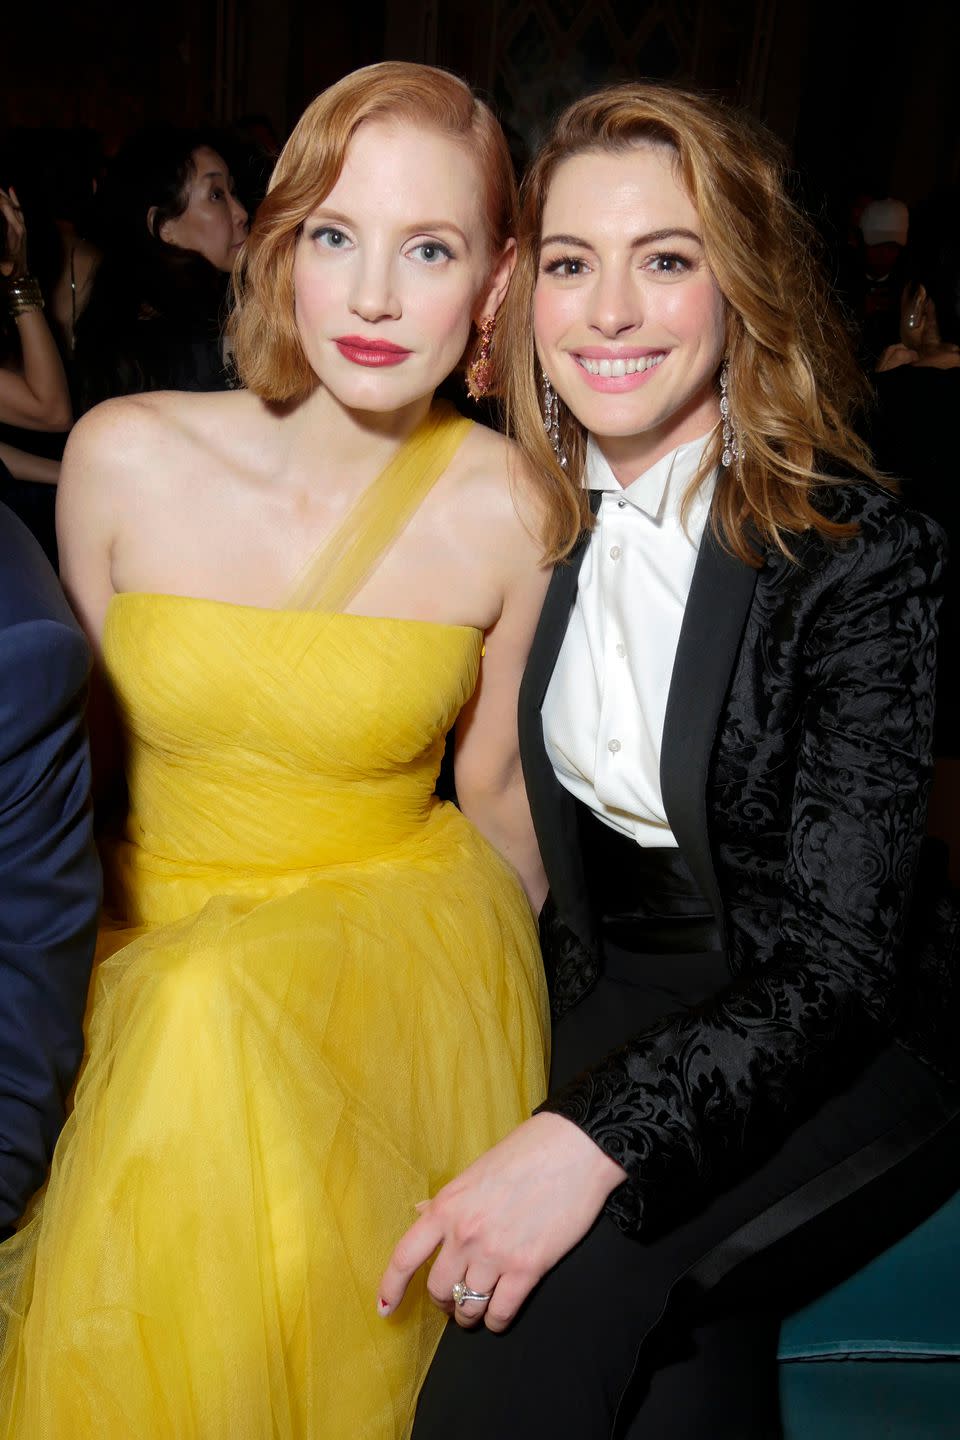 Jessica Chastain And Anne Hathaway Attend The Ralph Lauren Dinner, NYFW